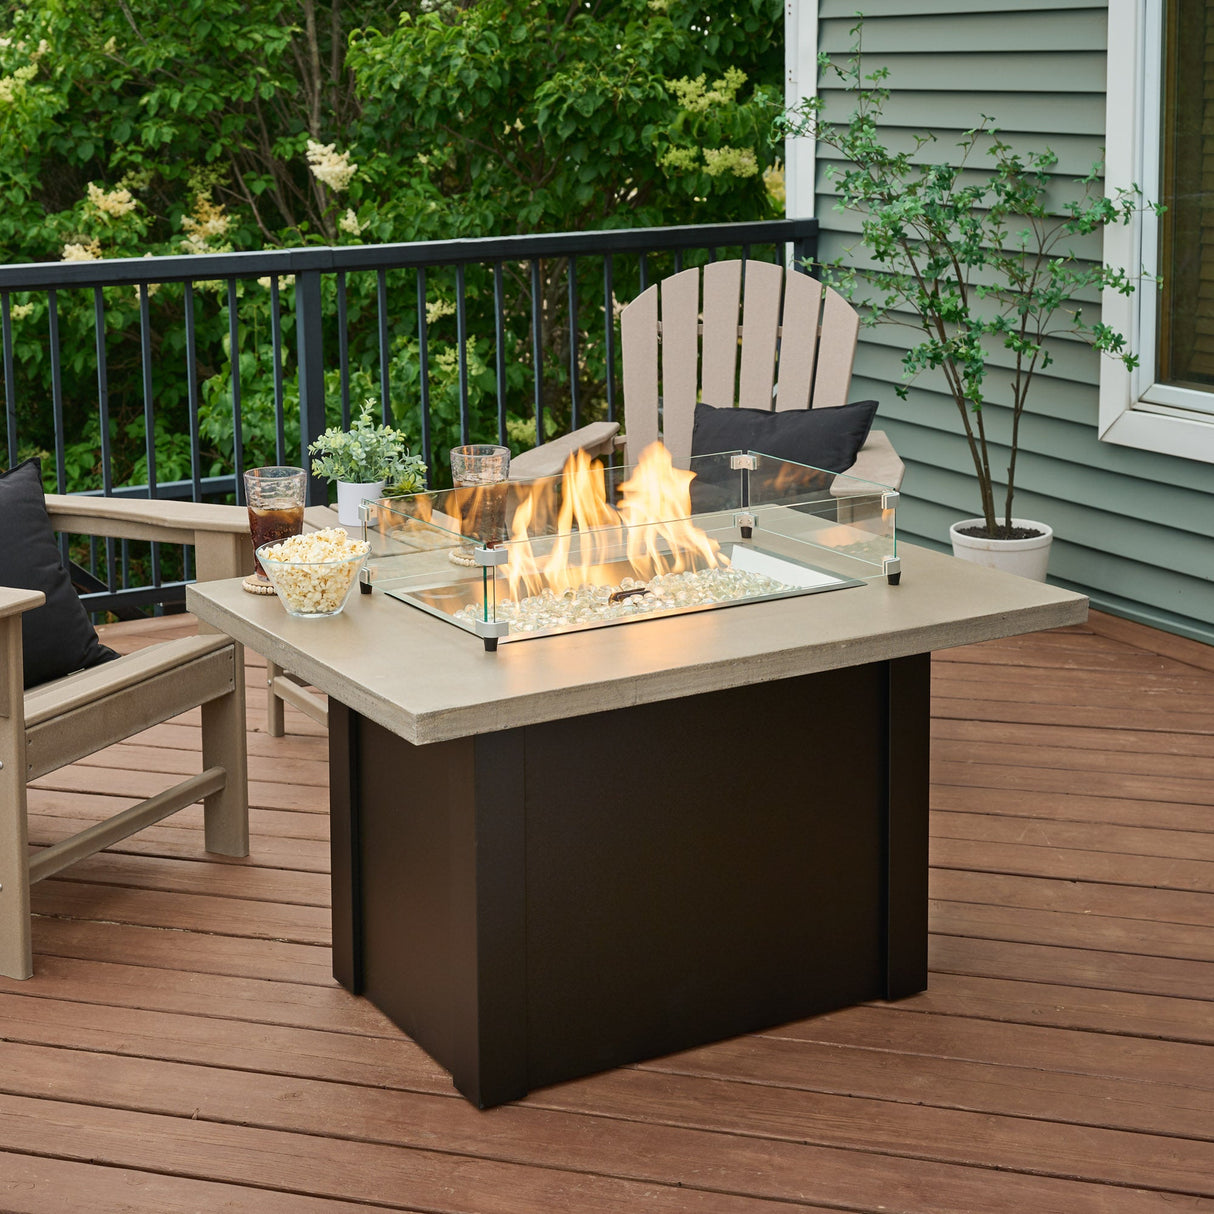 The Havenwood Rectangular Gas Fire Pit Table being used as a table with food and rink on the edges